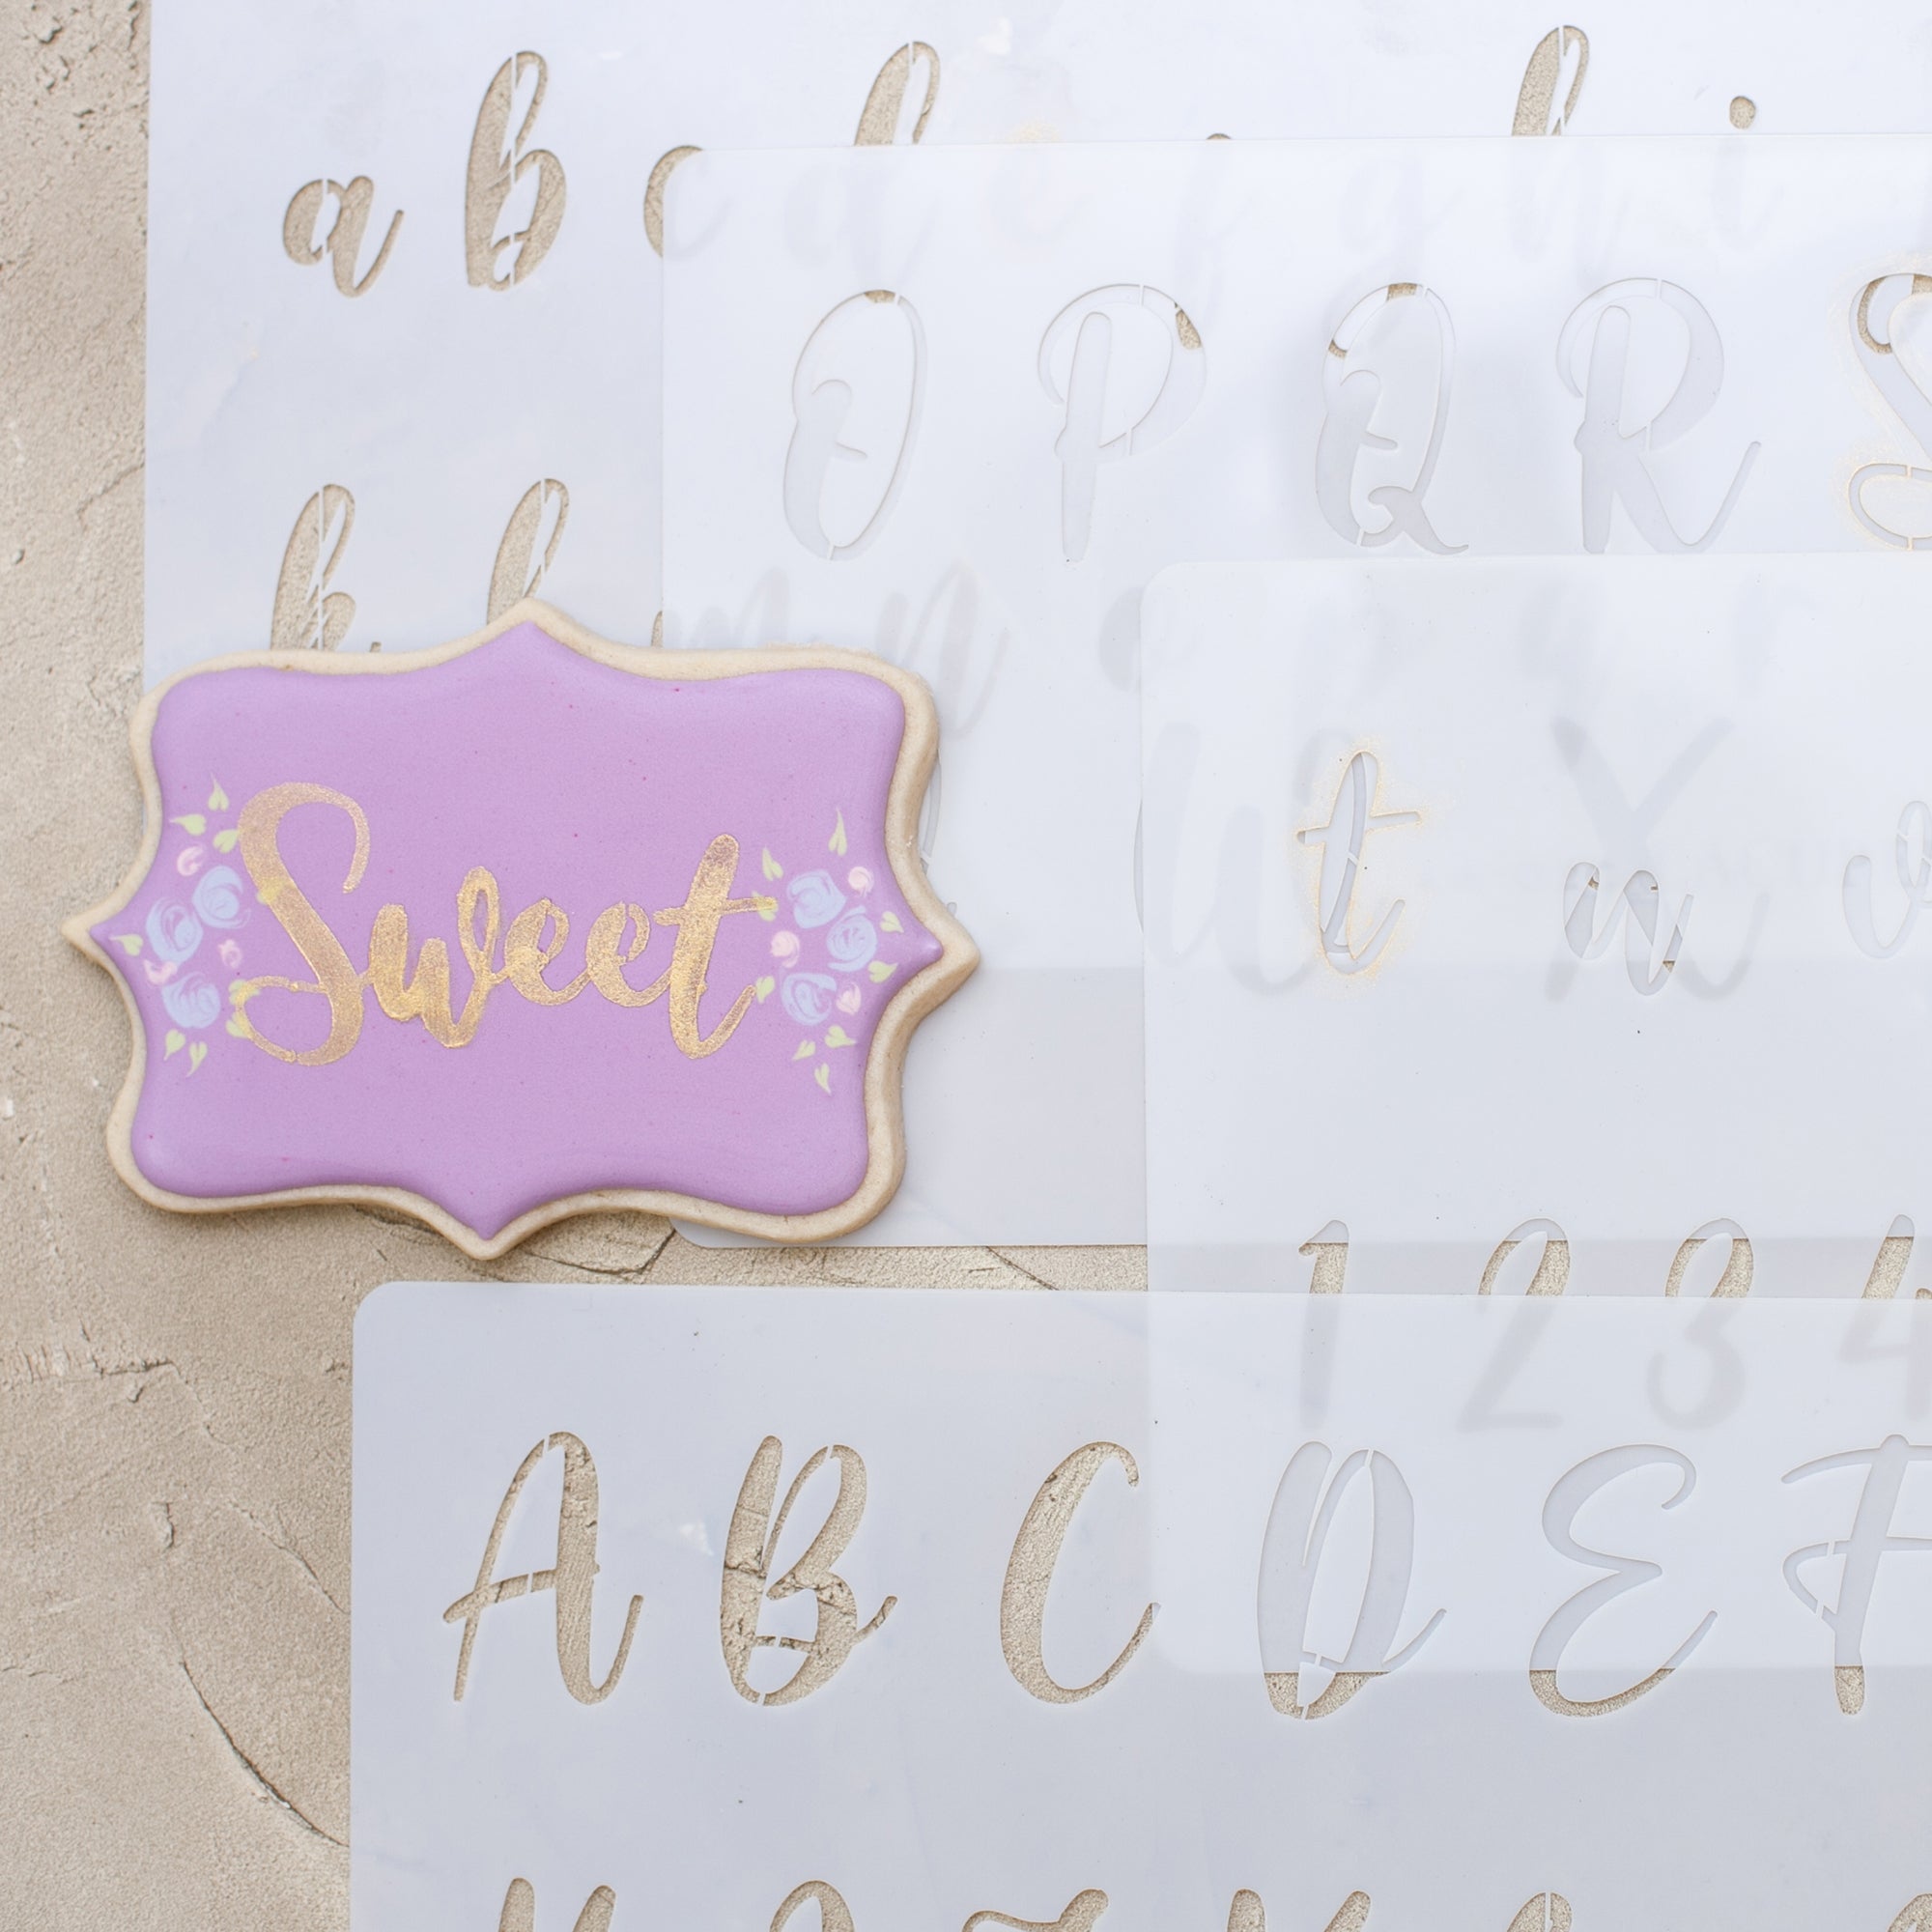 Gradient Free Vector Cake Decorator Icing Font With Birthday Cake Stock  Illustration - Download Image Now - iStock